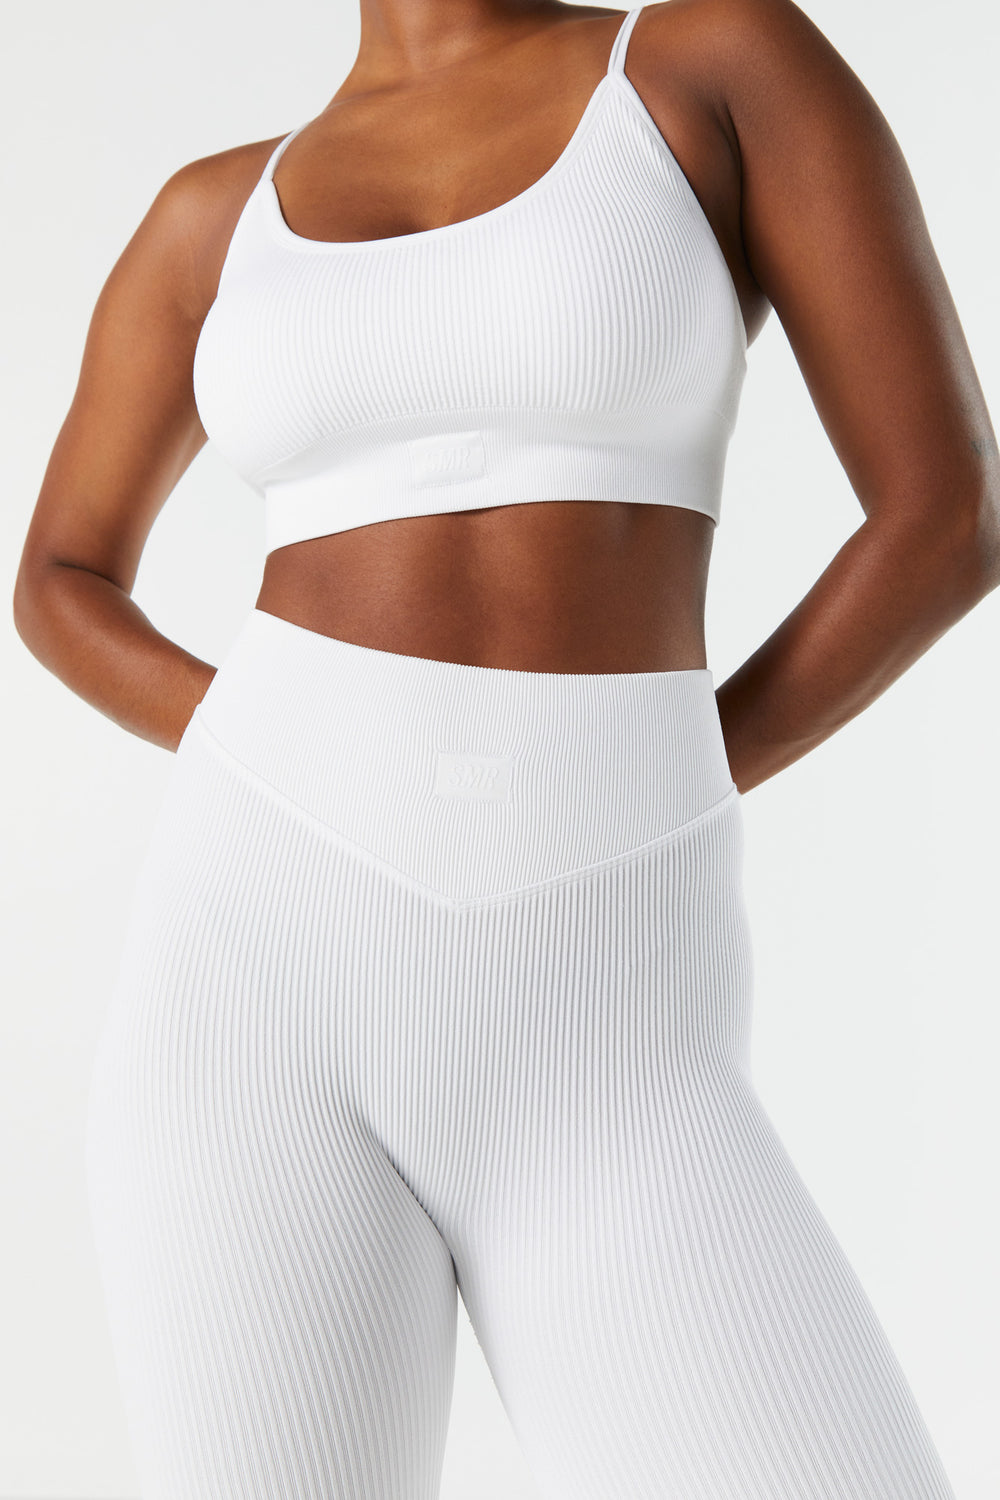 Sommer Ray Seamless Ribbed Active Legging Sommer Ray Seamless Ribbed Active Legging 19